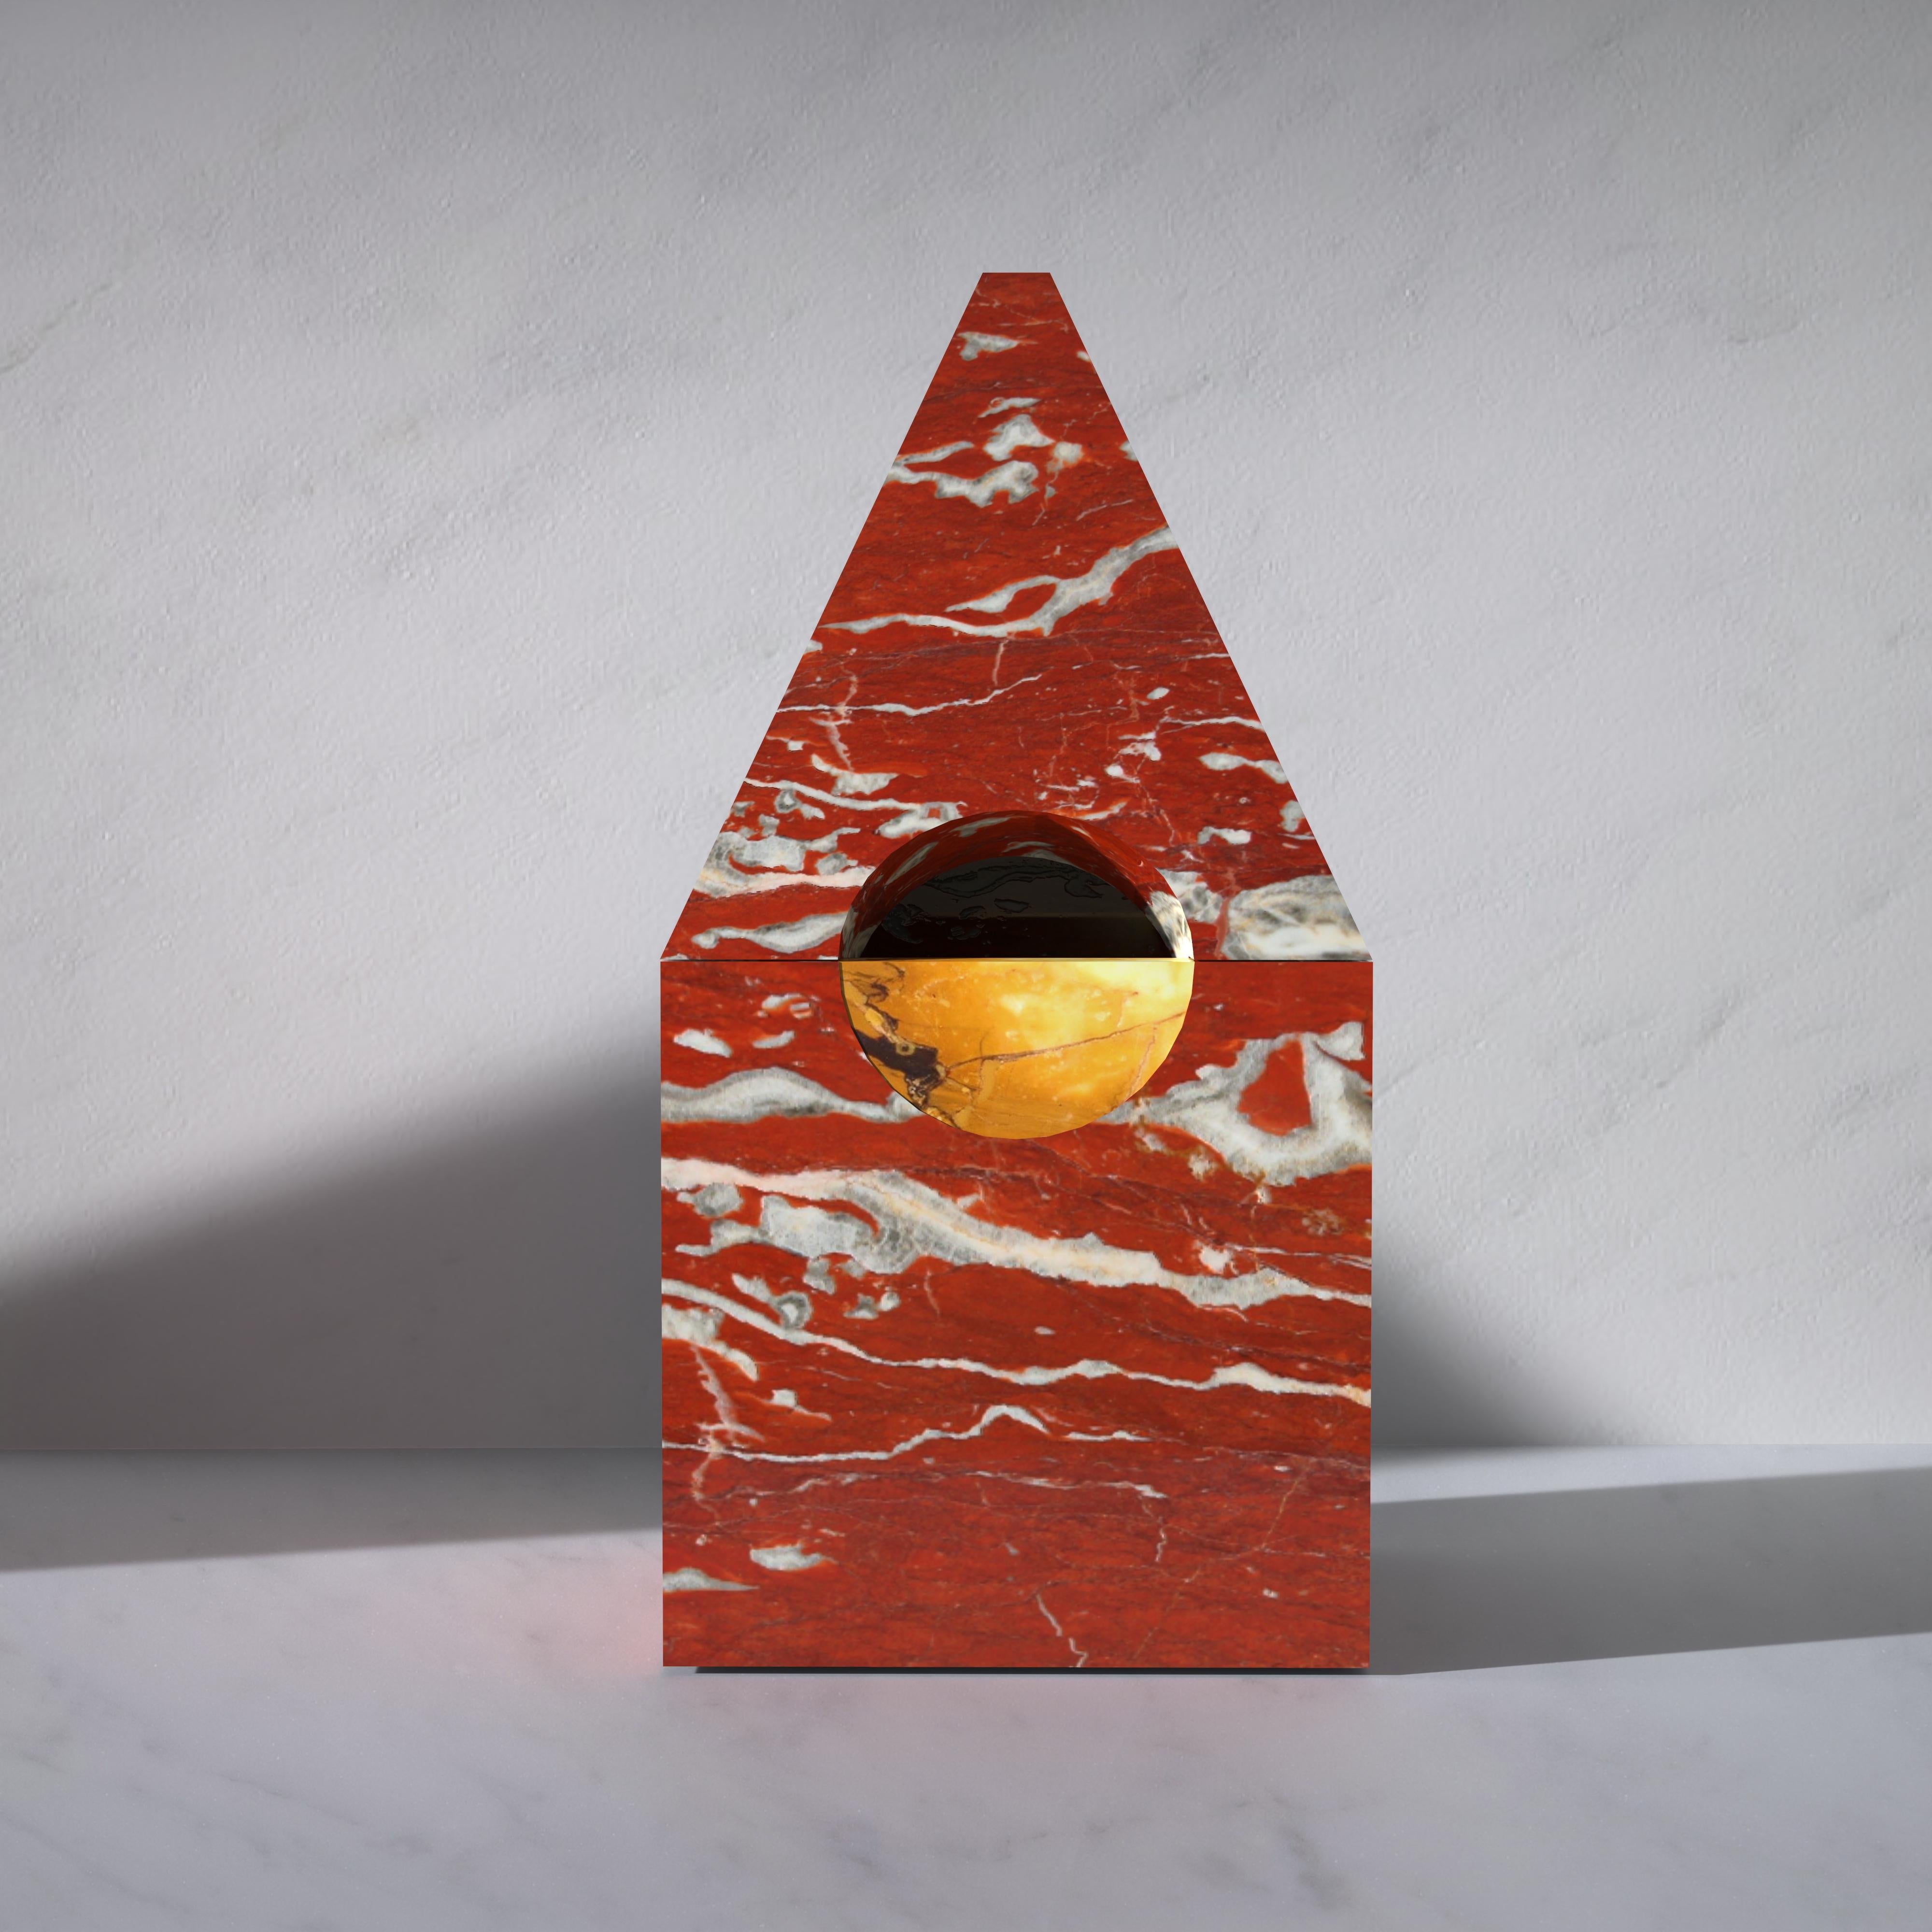 The sweetest memories deserve a precious casket. Adorned with a half-moon set into its walls, the Nostalgia portagingilli is made of two-tone marble. The bold combination of red and yellow marble lends a sophisticated and classic allure. A small